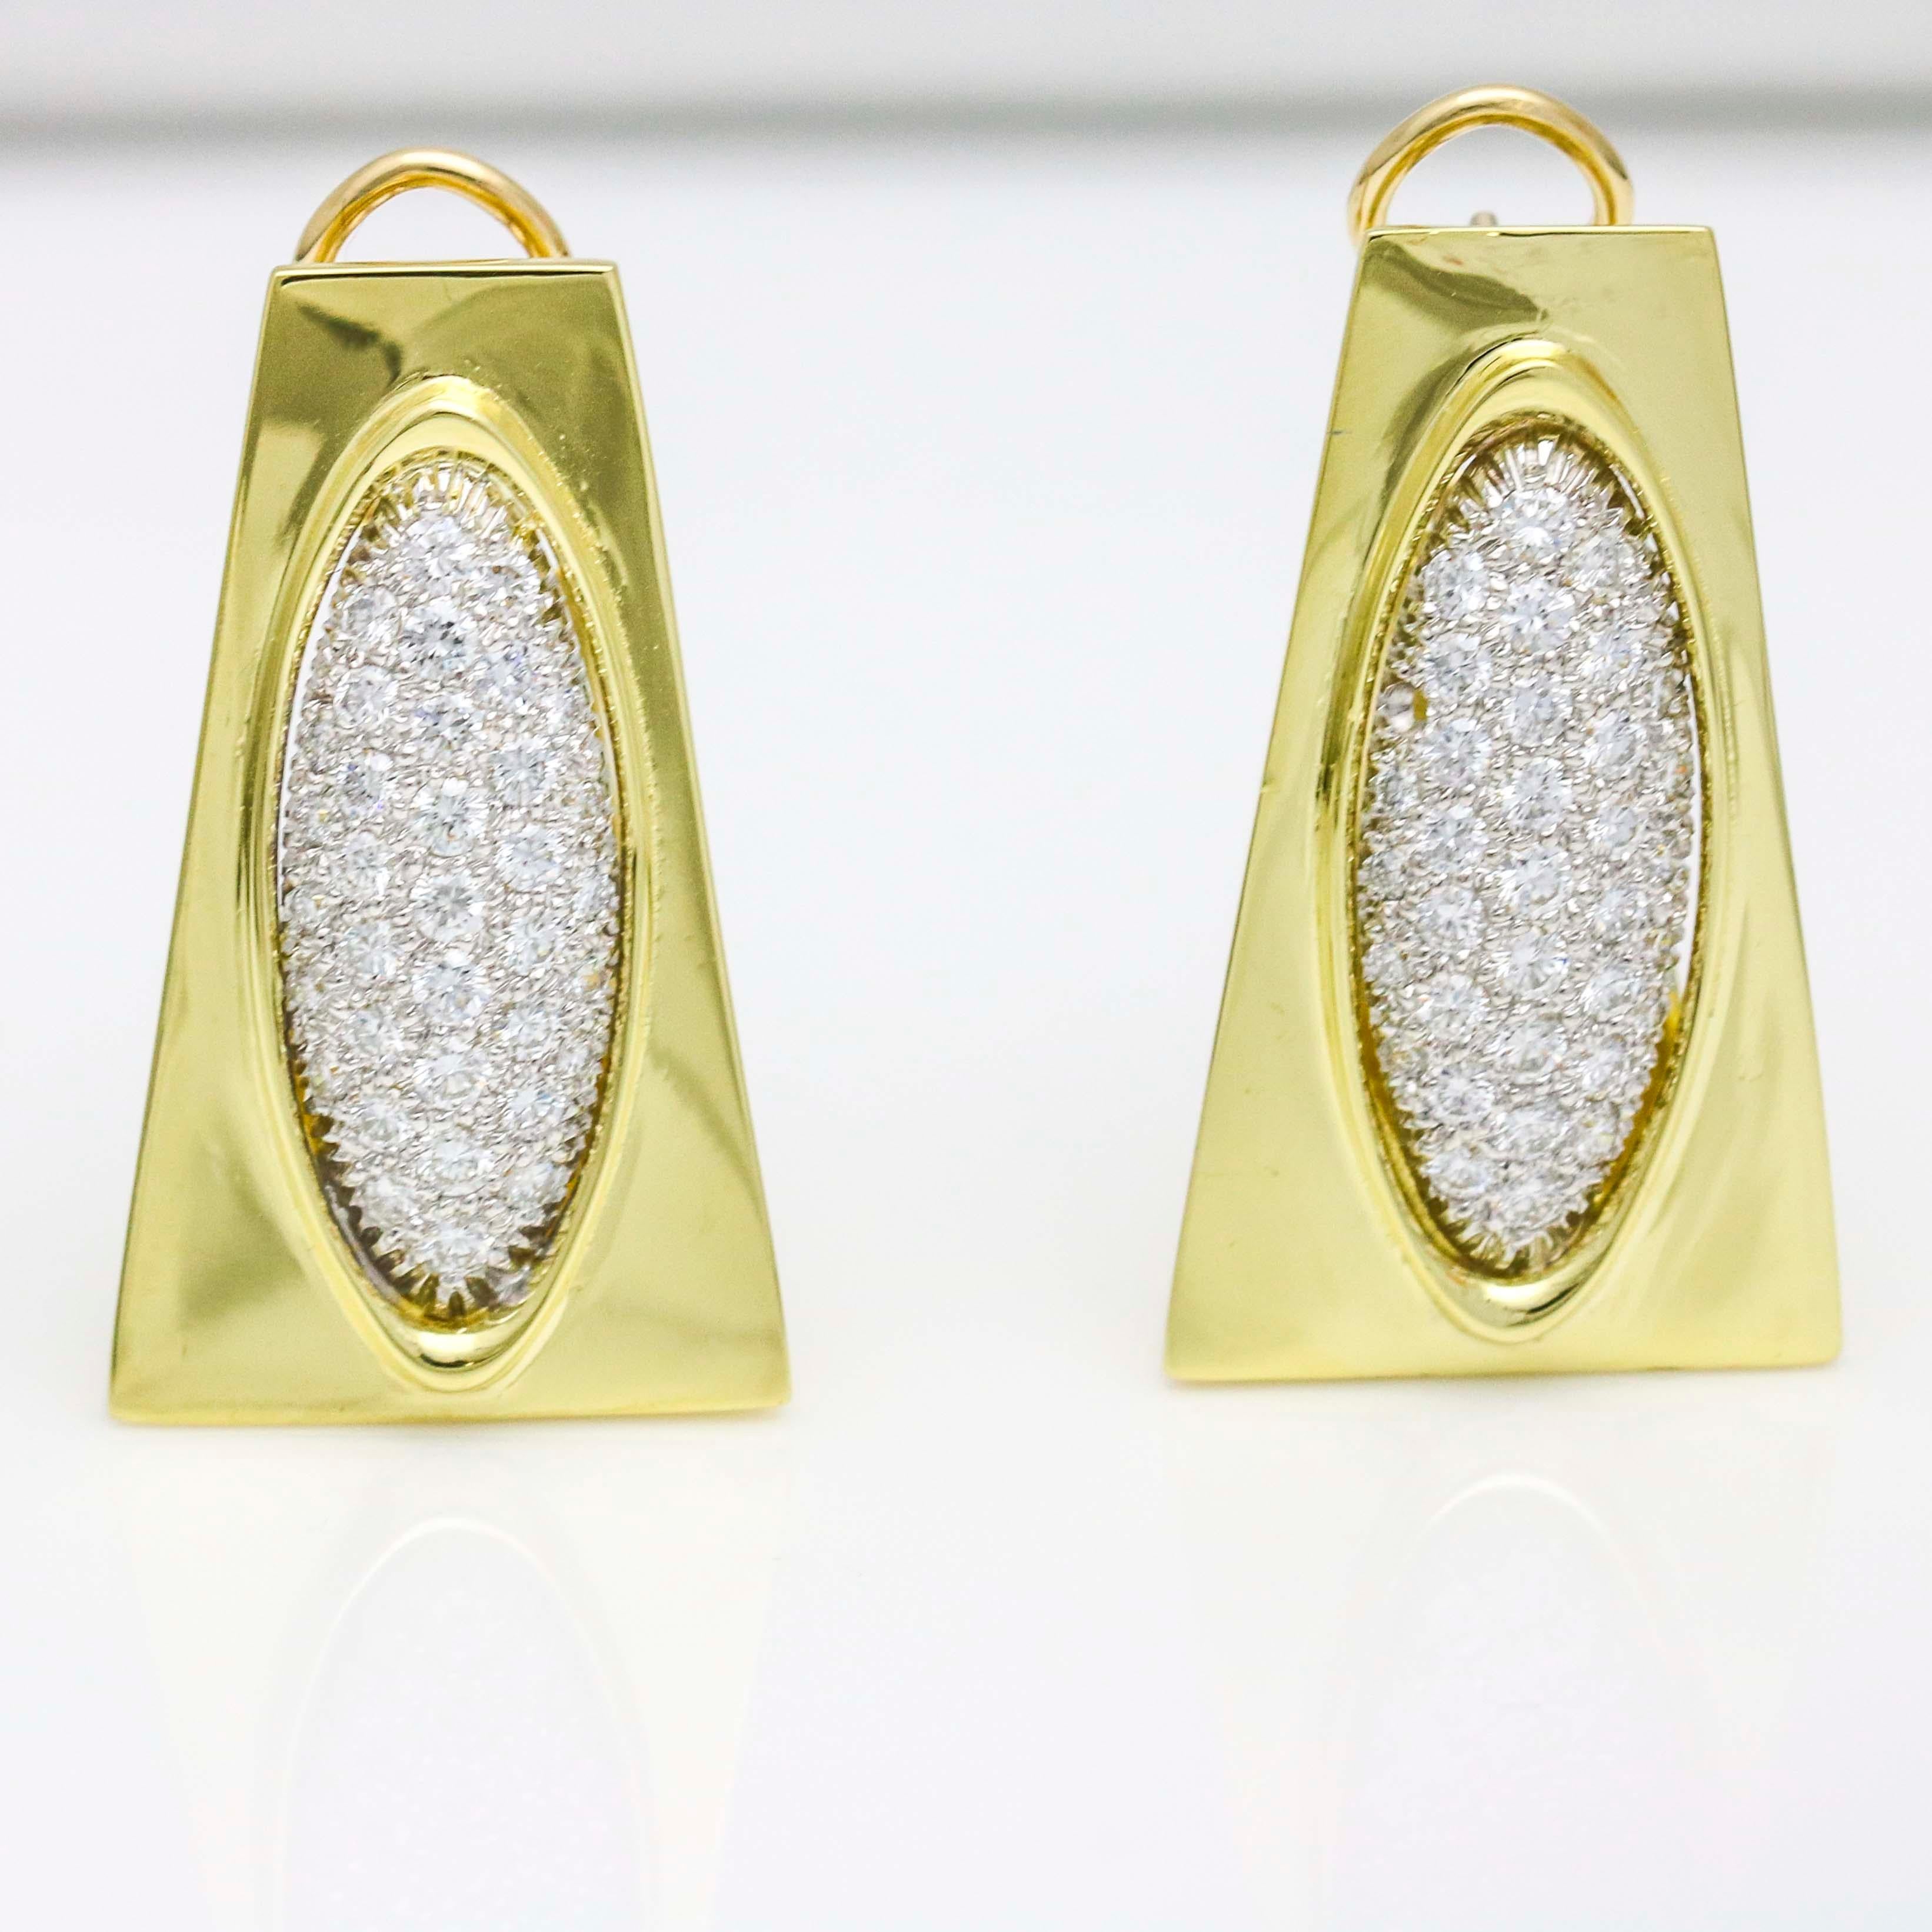 Henry Dunay 3.00 Carat Diamond 18 Karat Yellow Gold Earrings In Good Condition For Sale In Fort Lauderdale, FL